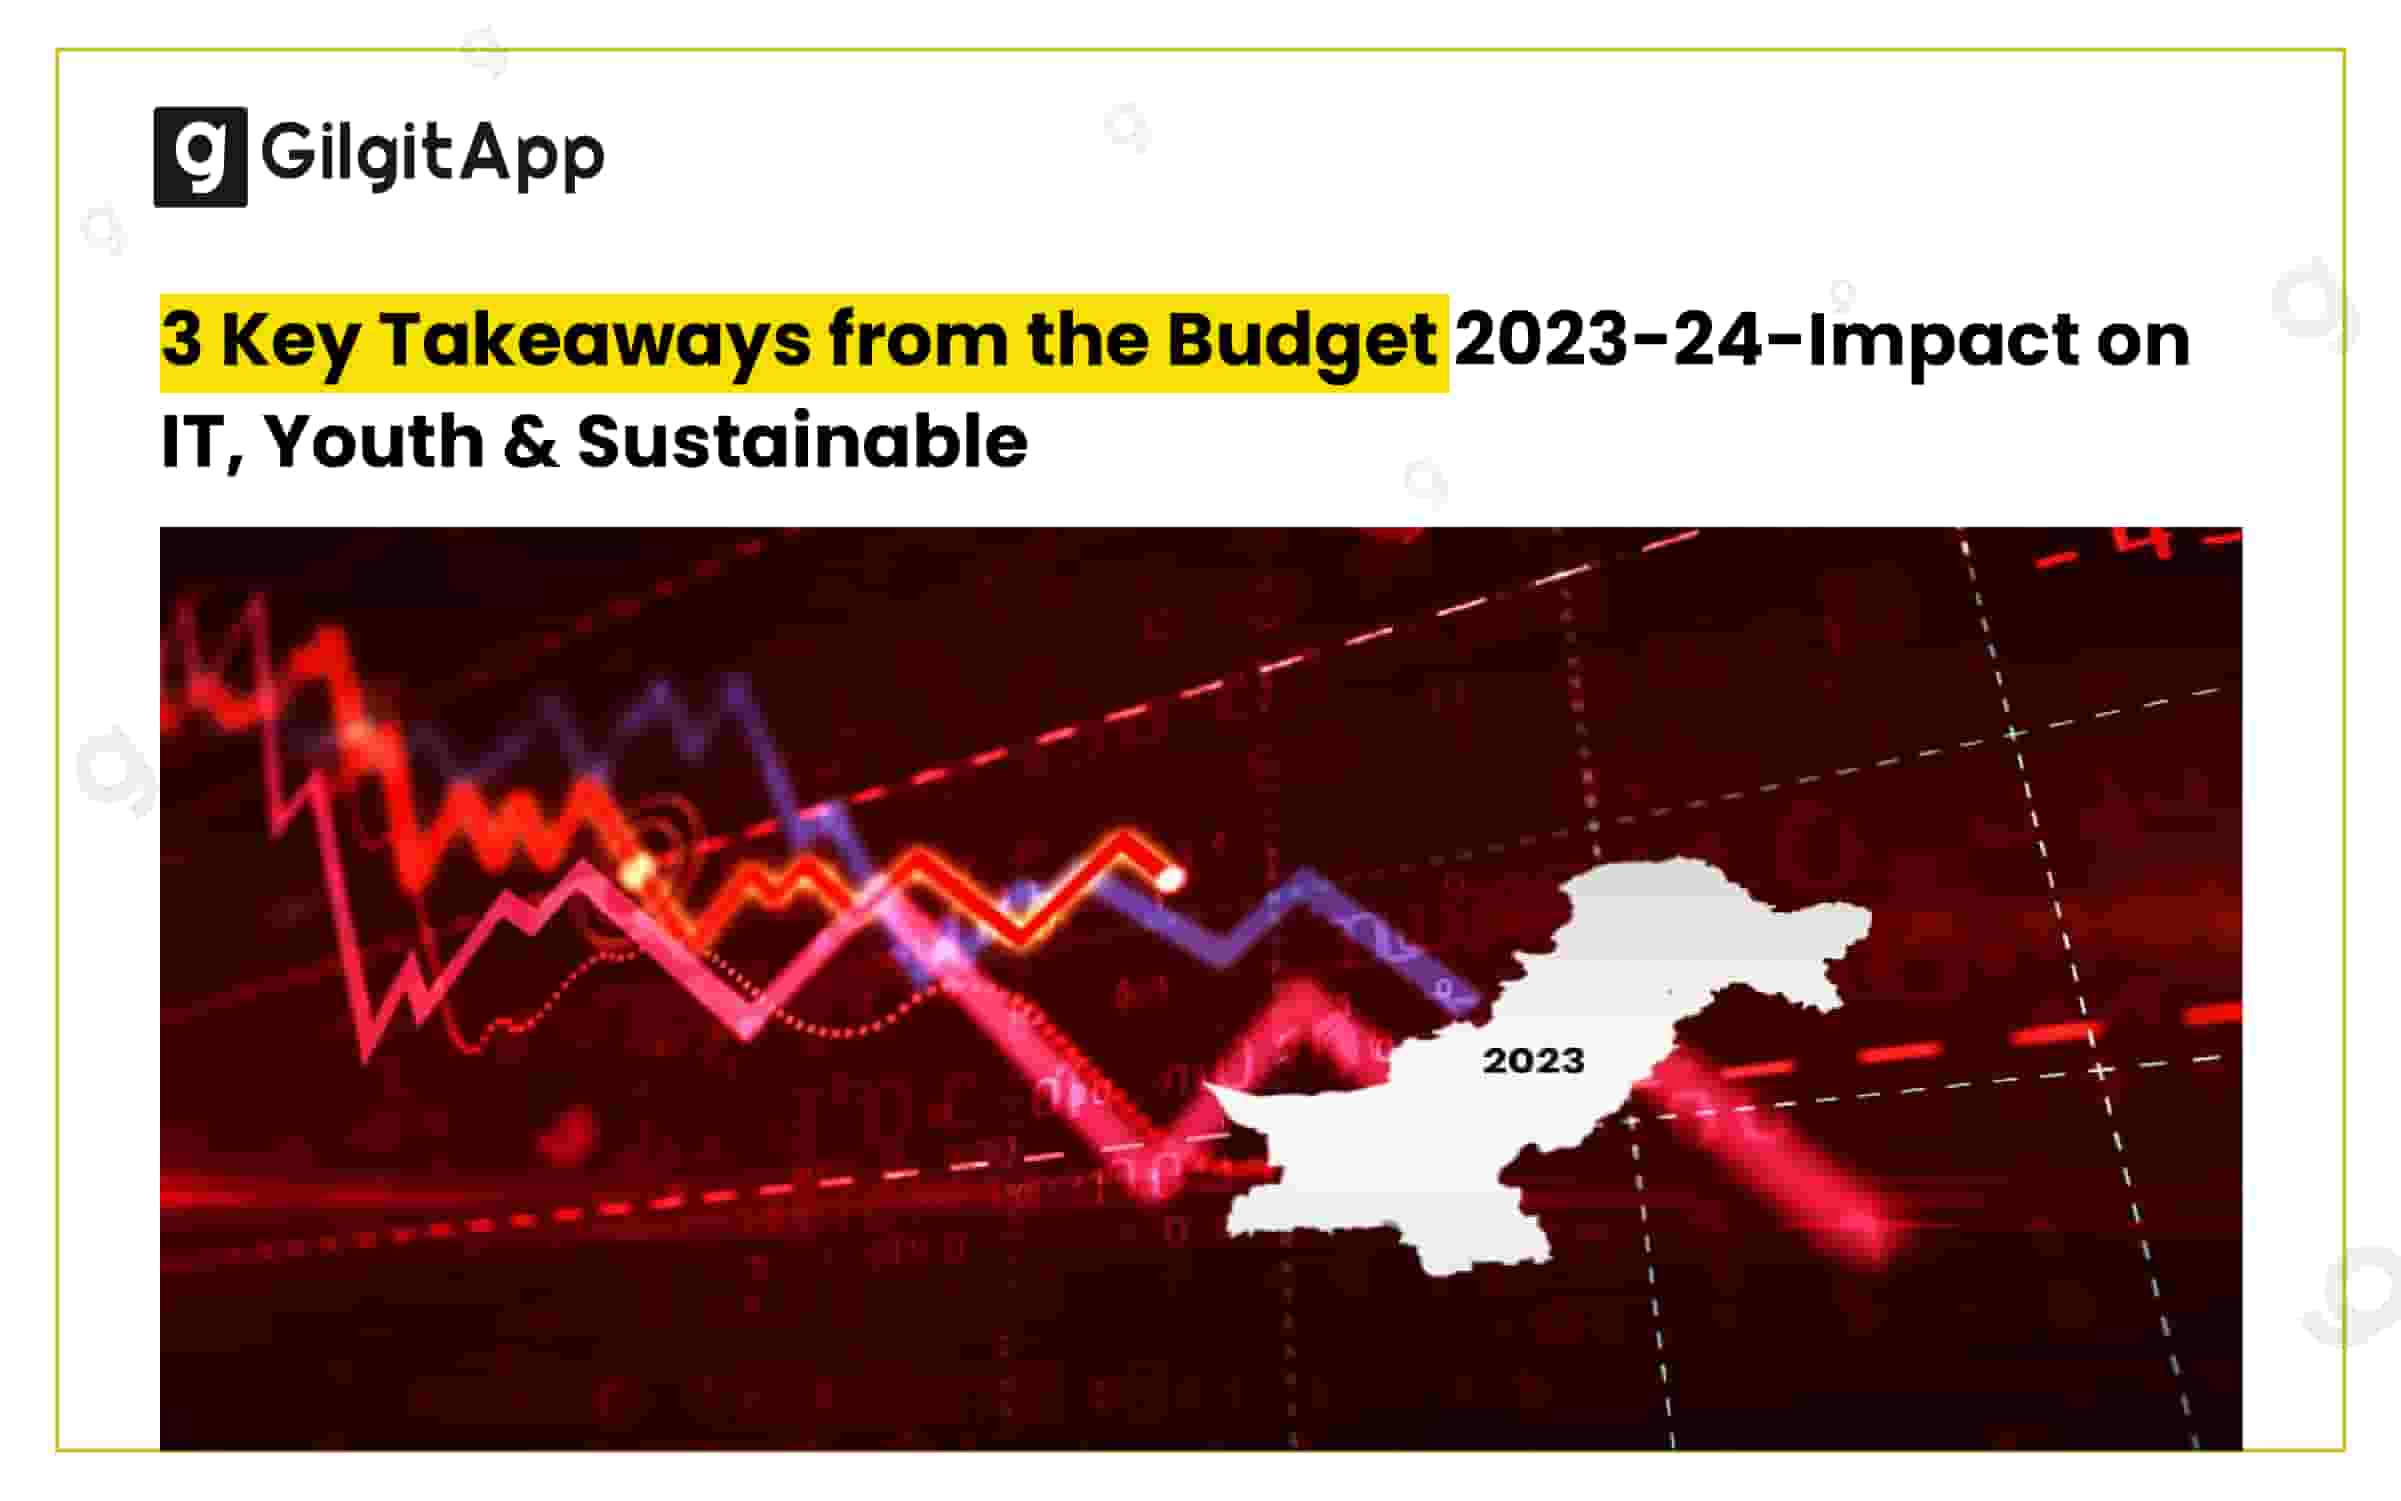 3 Key Takeaways from the Budget 2023-24-Beneficiary Sectors